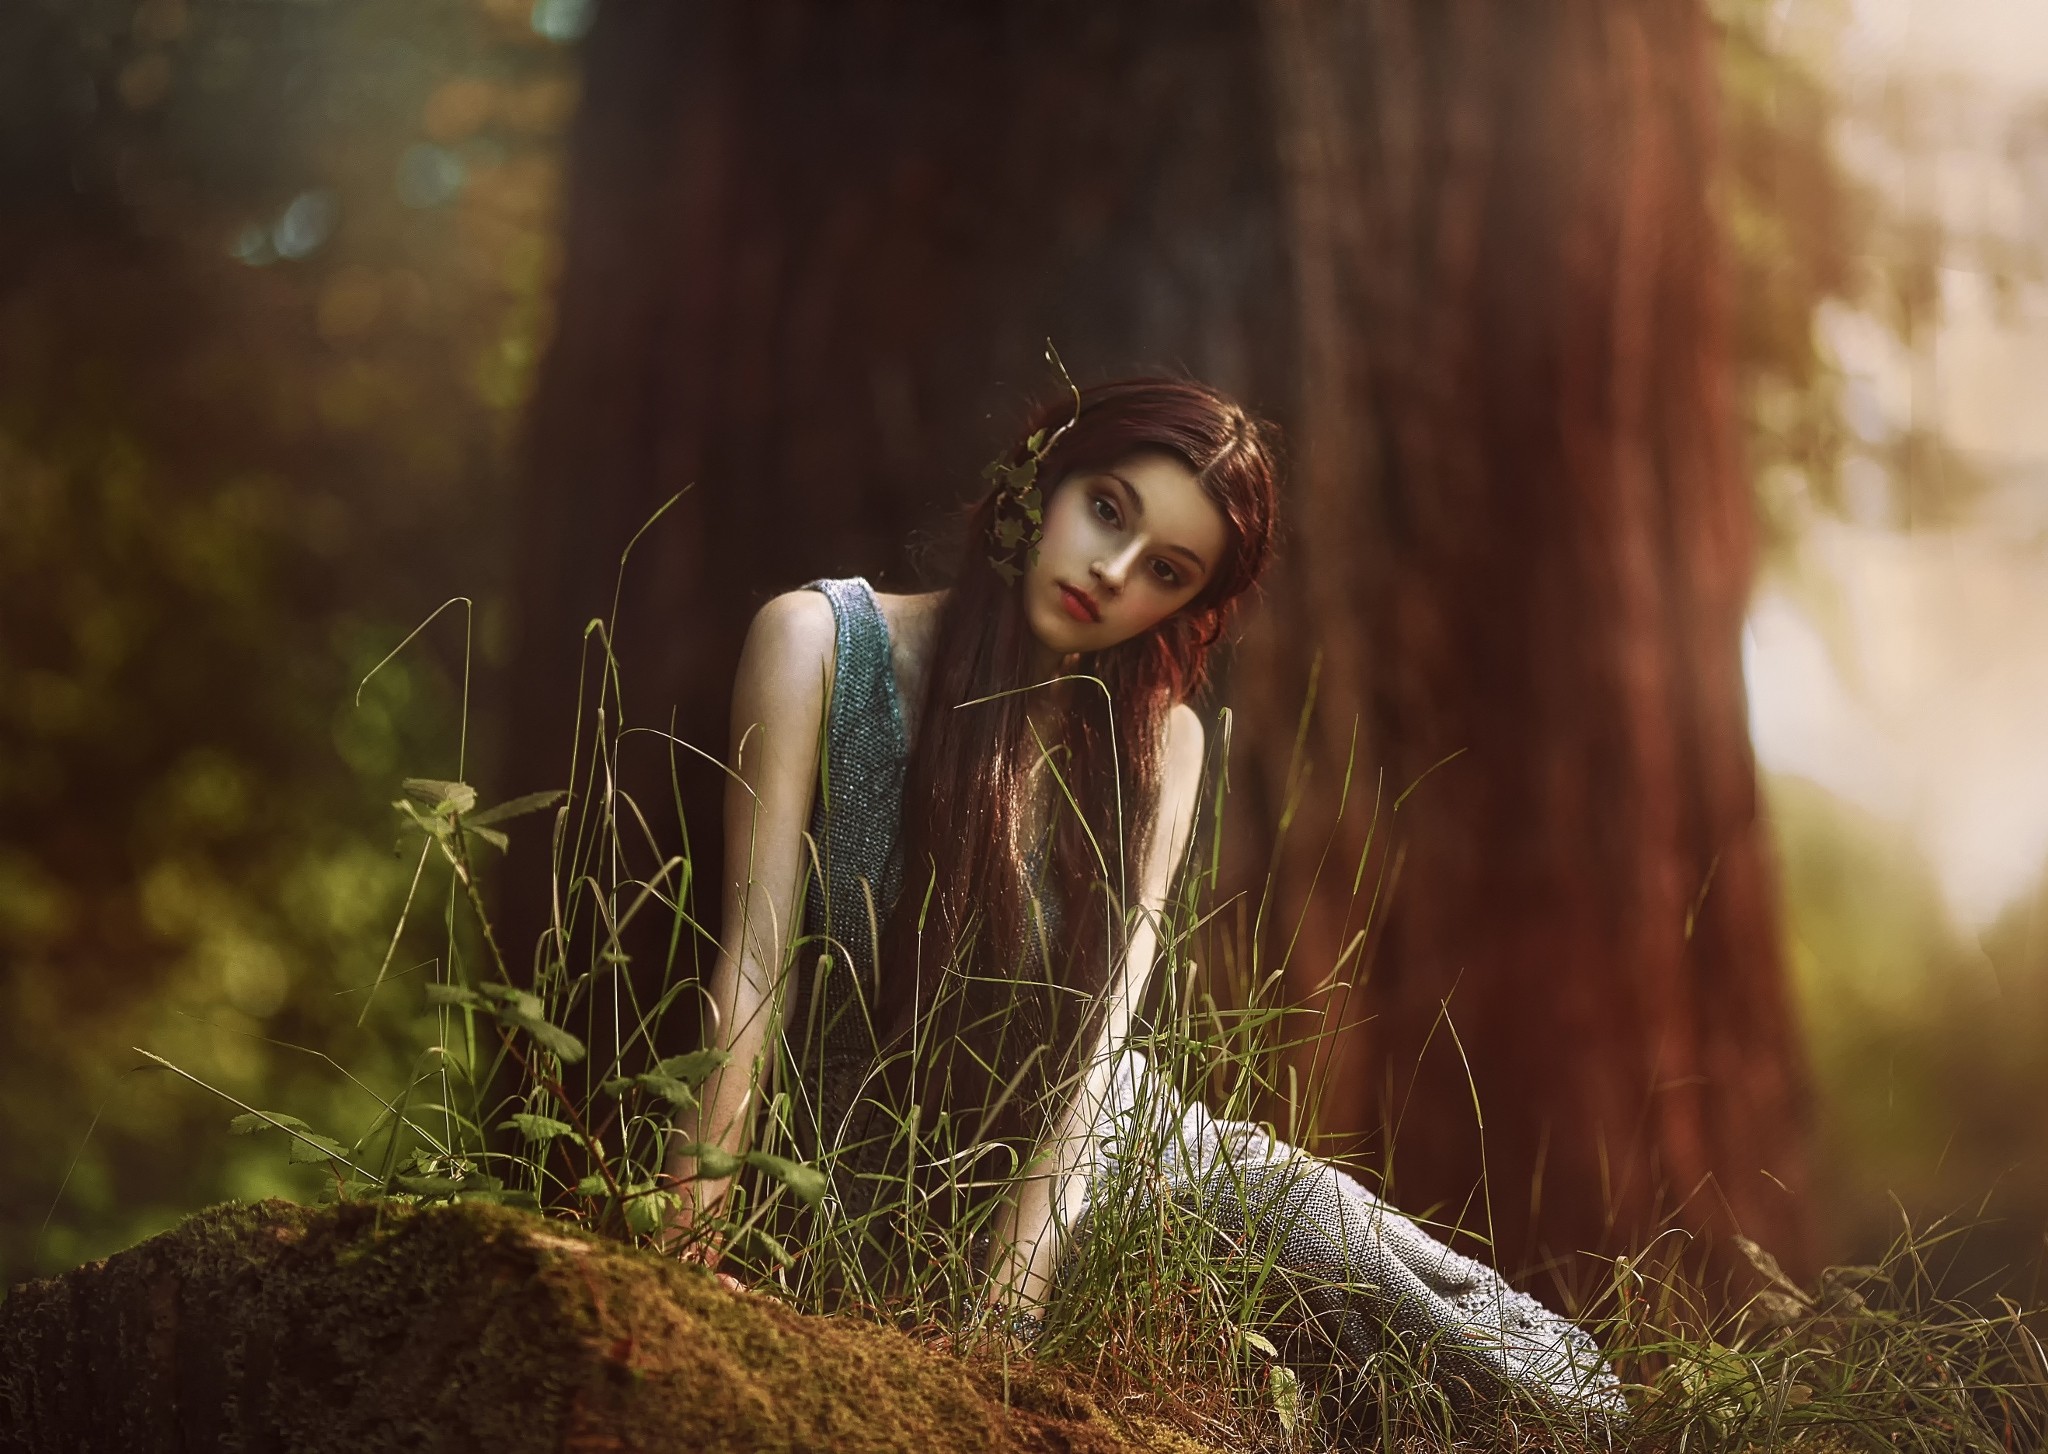 Girl in the Forest by Agnieszka Lorek